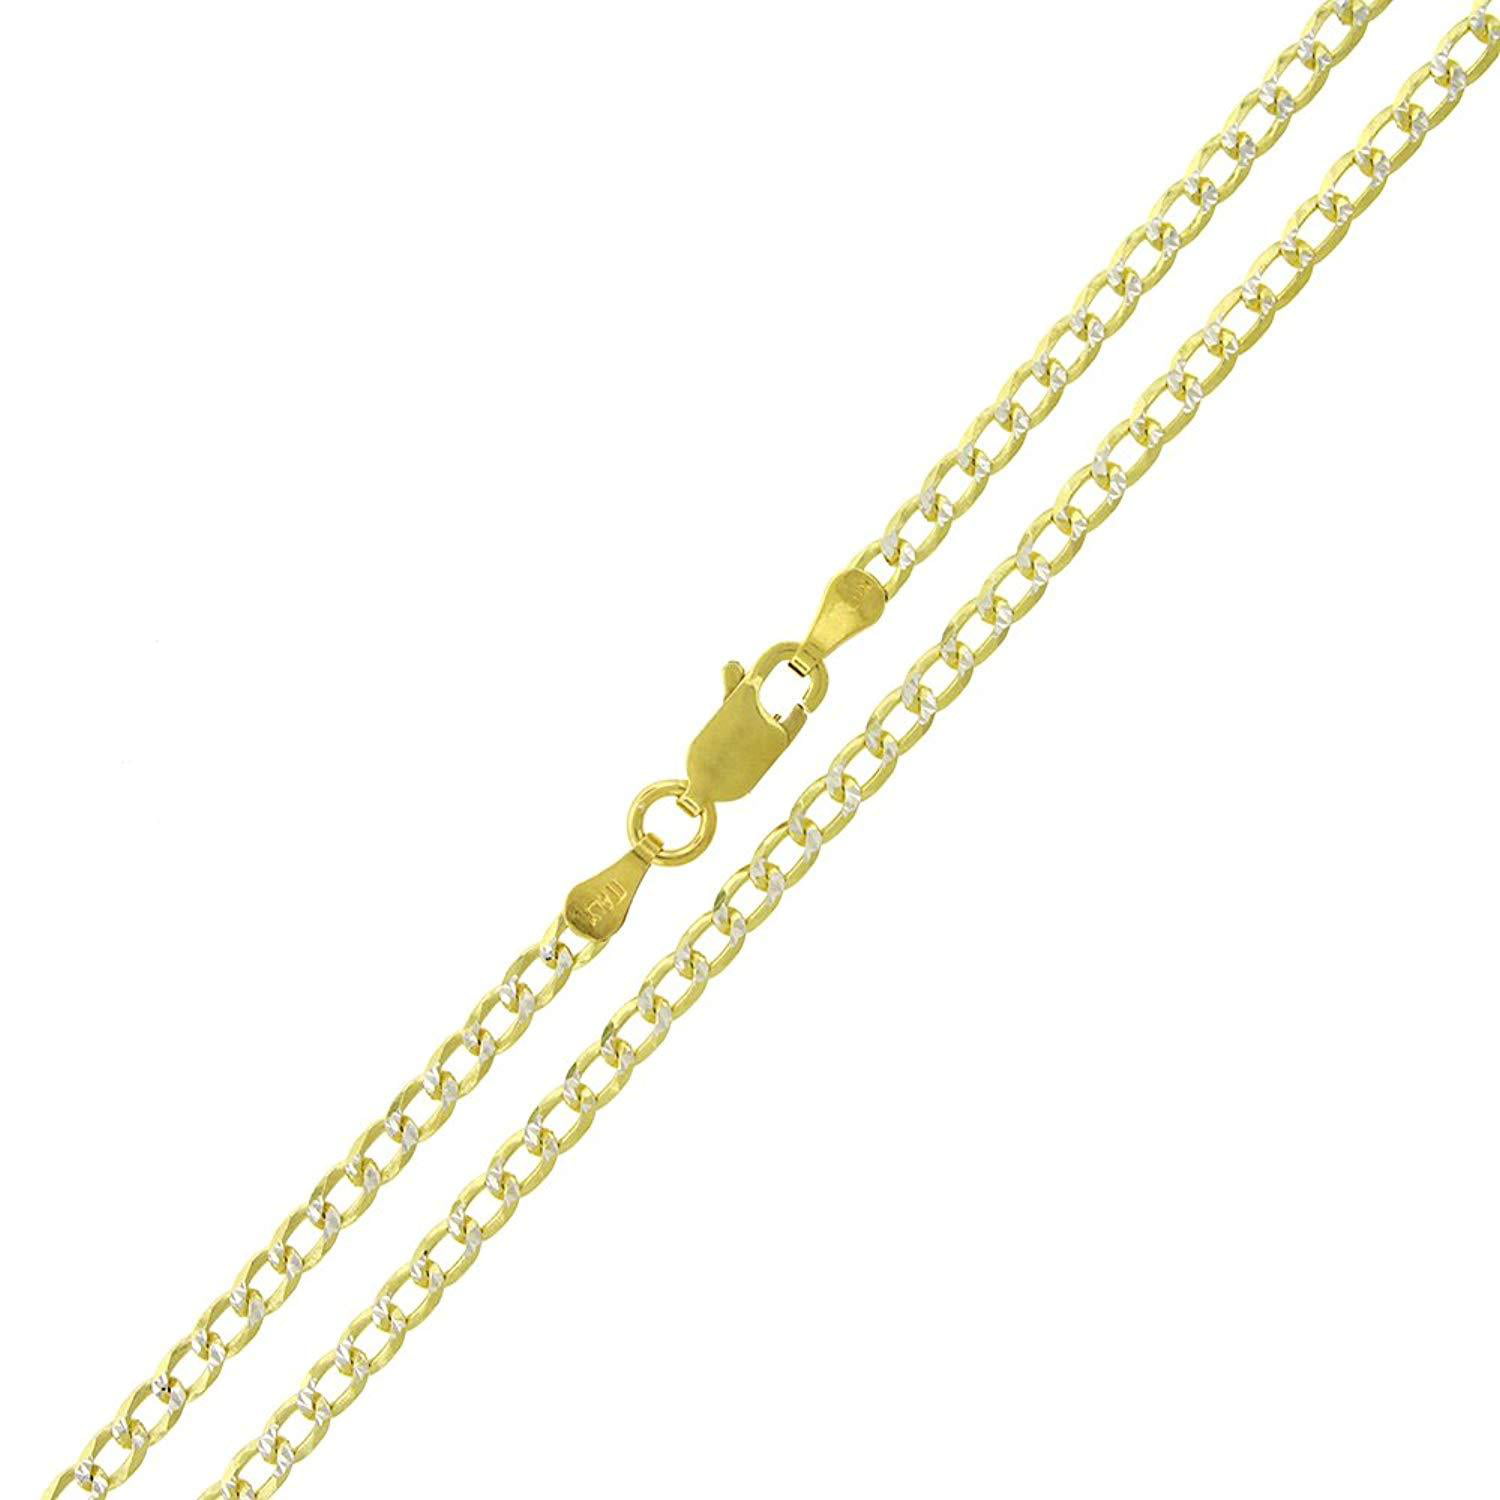 Authentic 14K Gold Over Silver 3MM Cuban Curb Link Diamond-Cut White Pave .925 ITProLux Necklace Chains, 16" - 30", Made In Italy, Next Level Jewelry